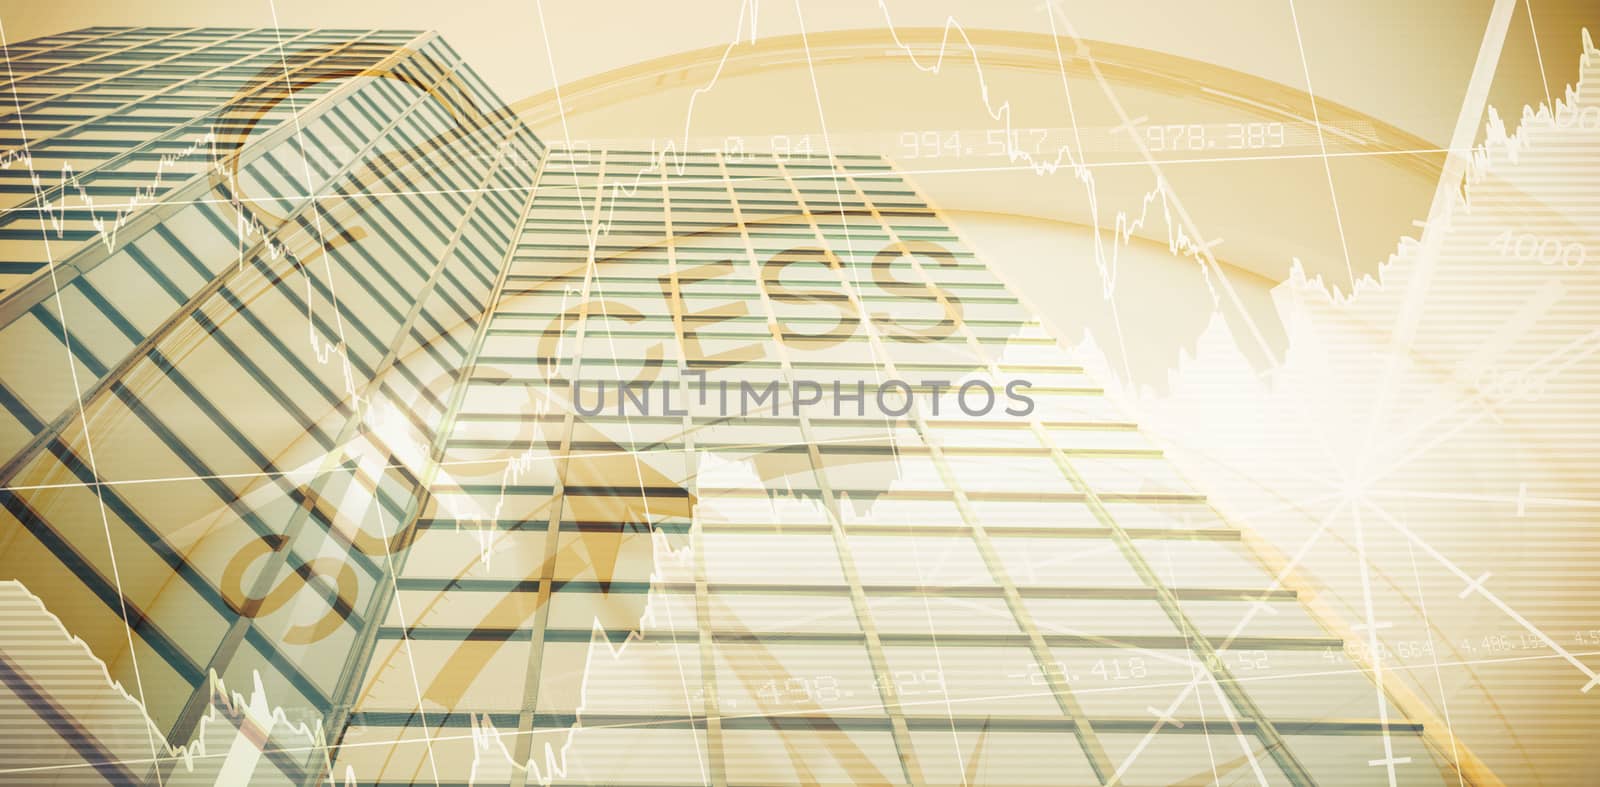 Success text with graphs and navigational compass against low angle close-up view of office building